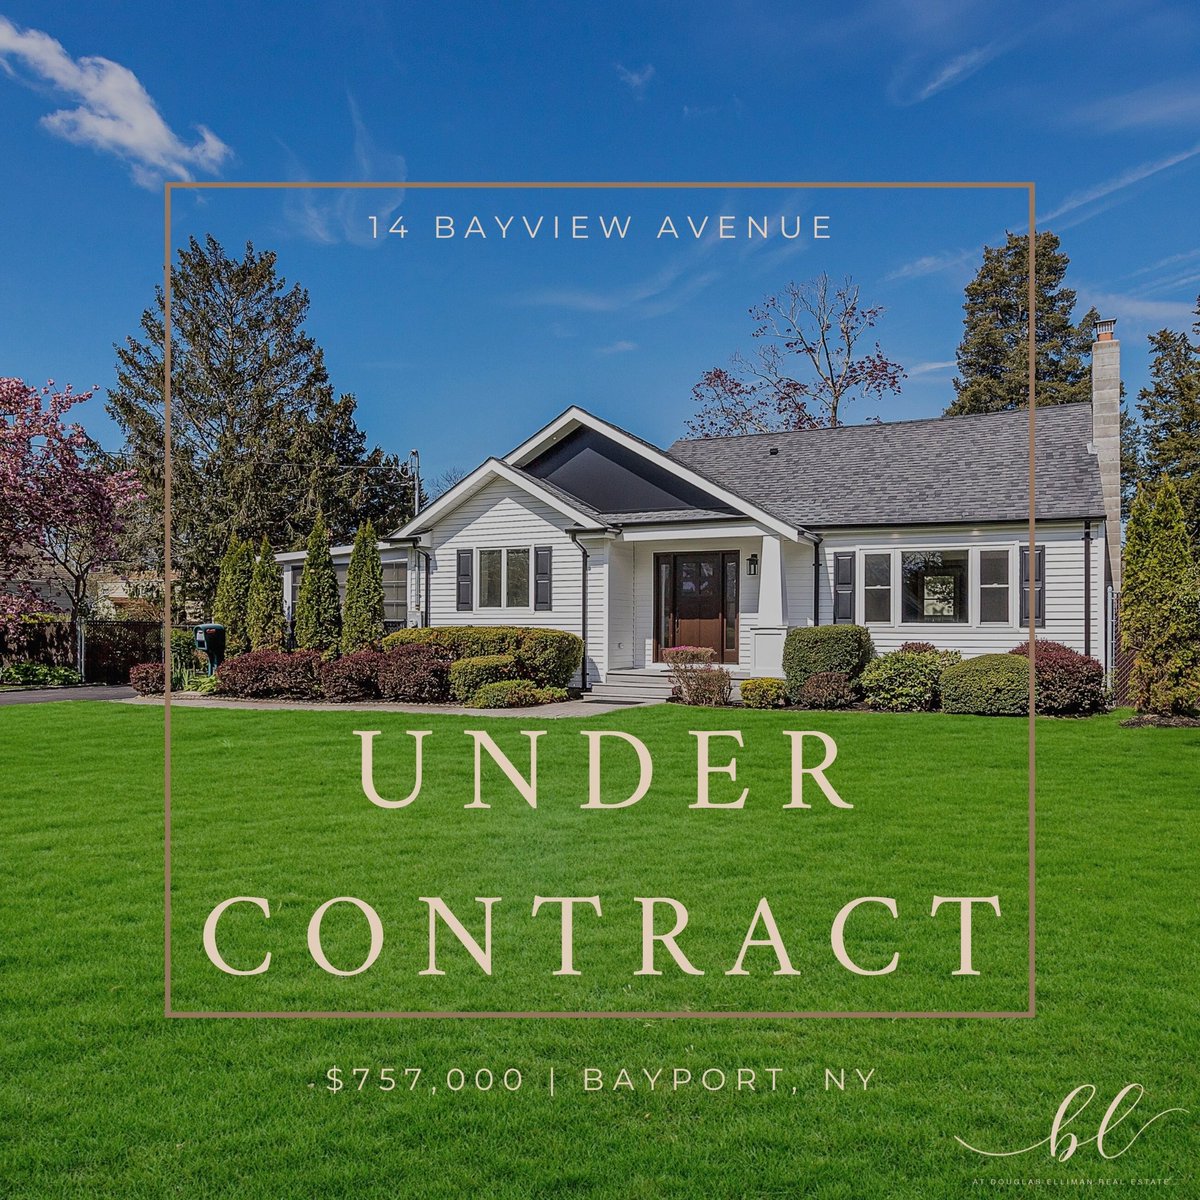 This charmer is now under contract in less than 1 week on the market. With this beautiful renovation, I’m surprised it took that long. 😂 Congratulations to all! ❤️ #SoldByBarbara #14BayviewAvenue 🏠
.
.
.
.
#SoldByBarbara #CallBarbara #ILoveWhatIDo #ListenToYourBroker